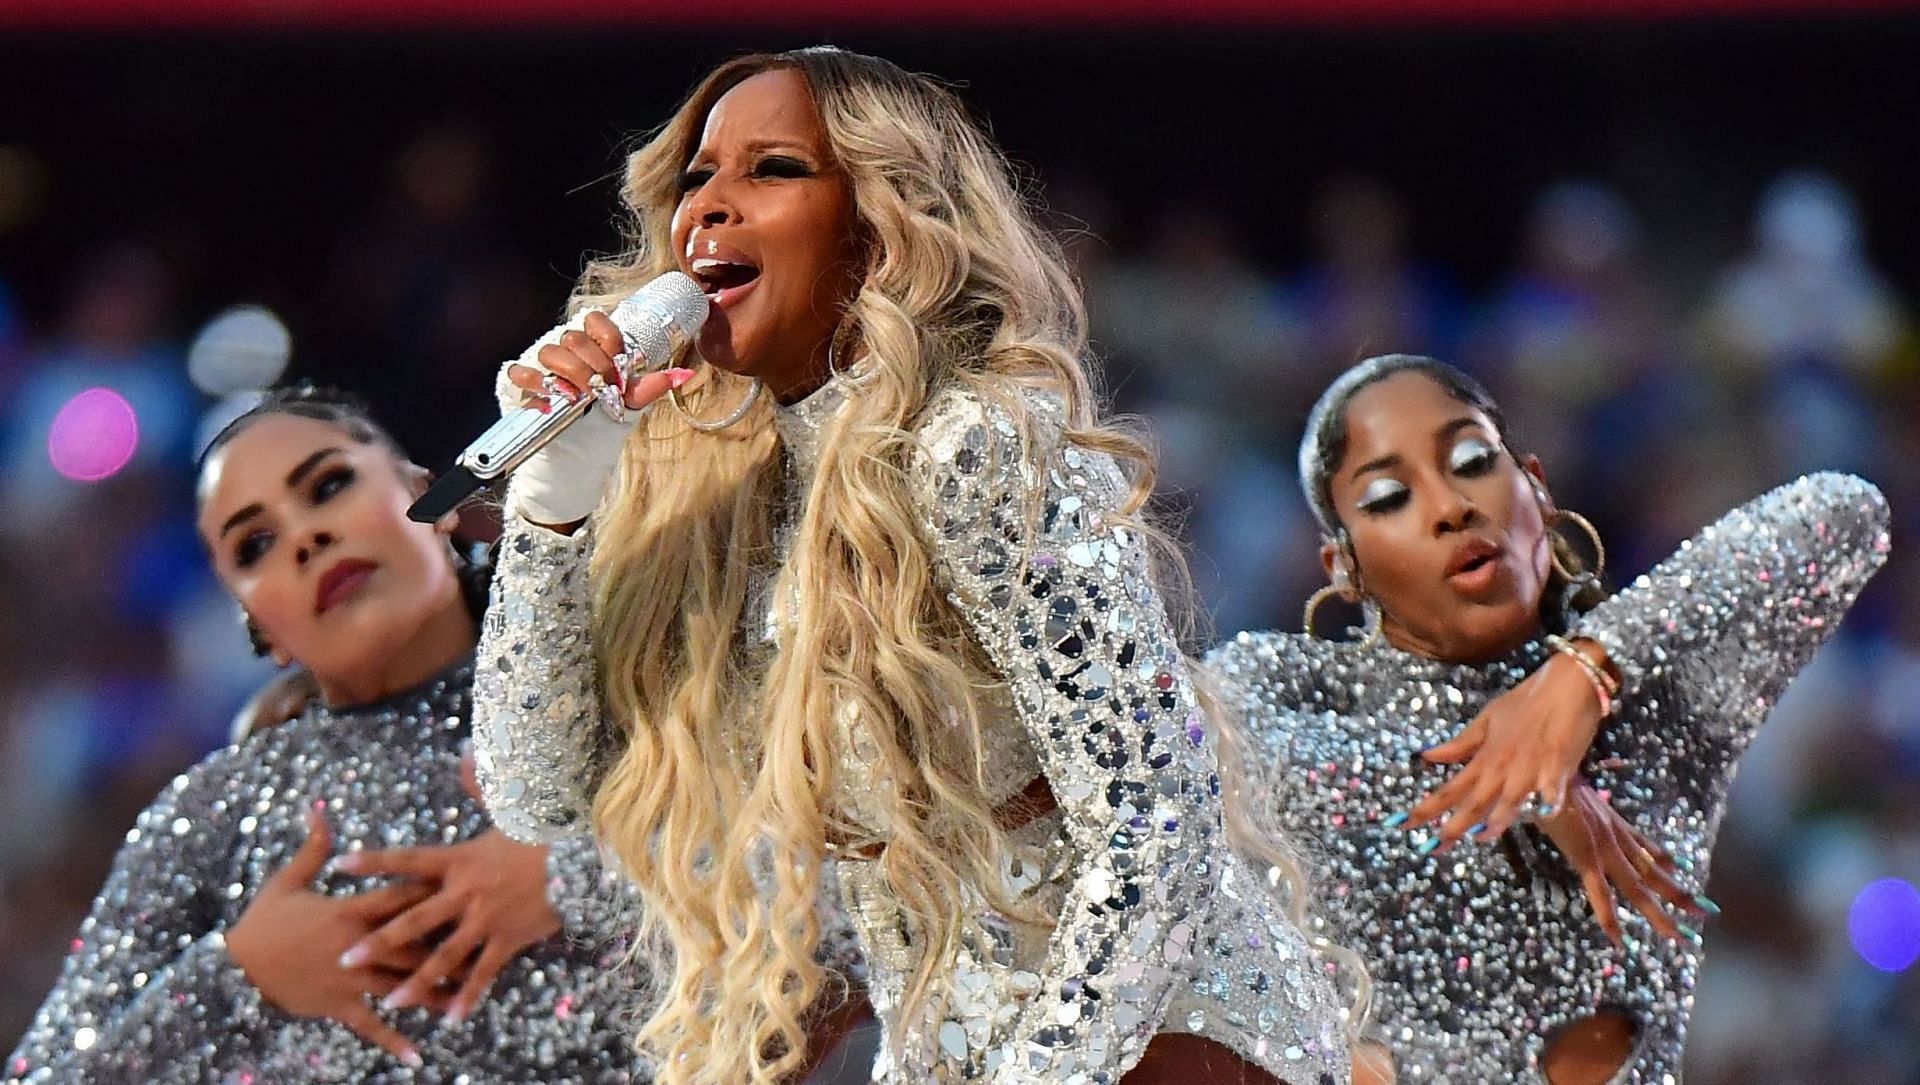 Mary J Blige at the Super Bowl 2022 Half-Time show (Image via Frederic J Brown/Getty Images)